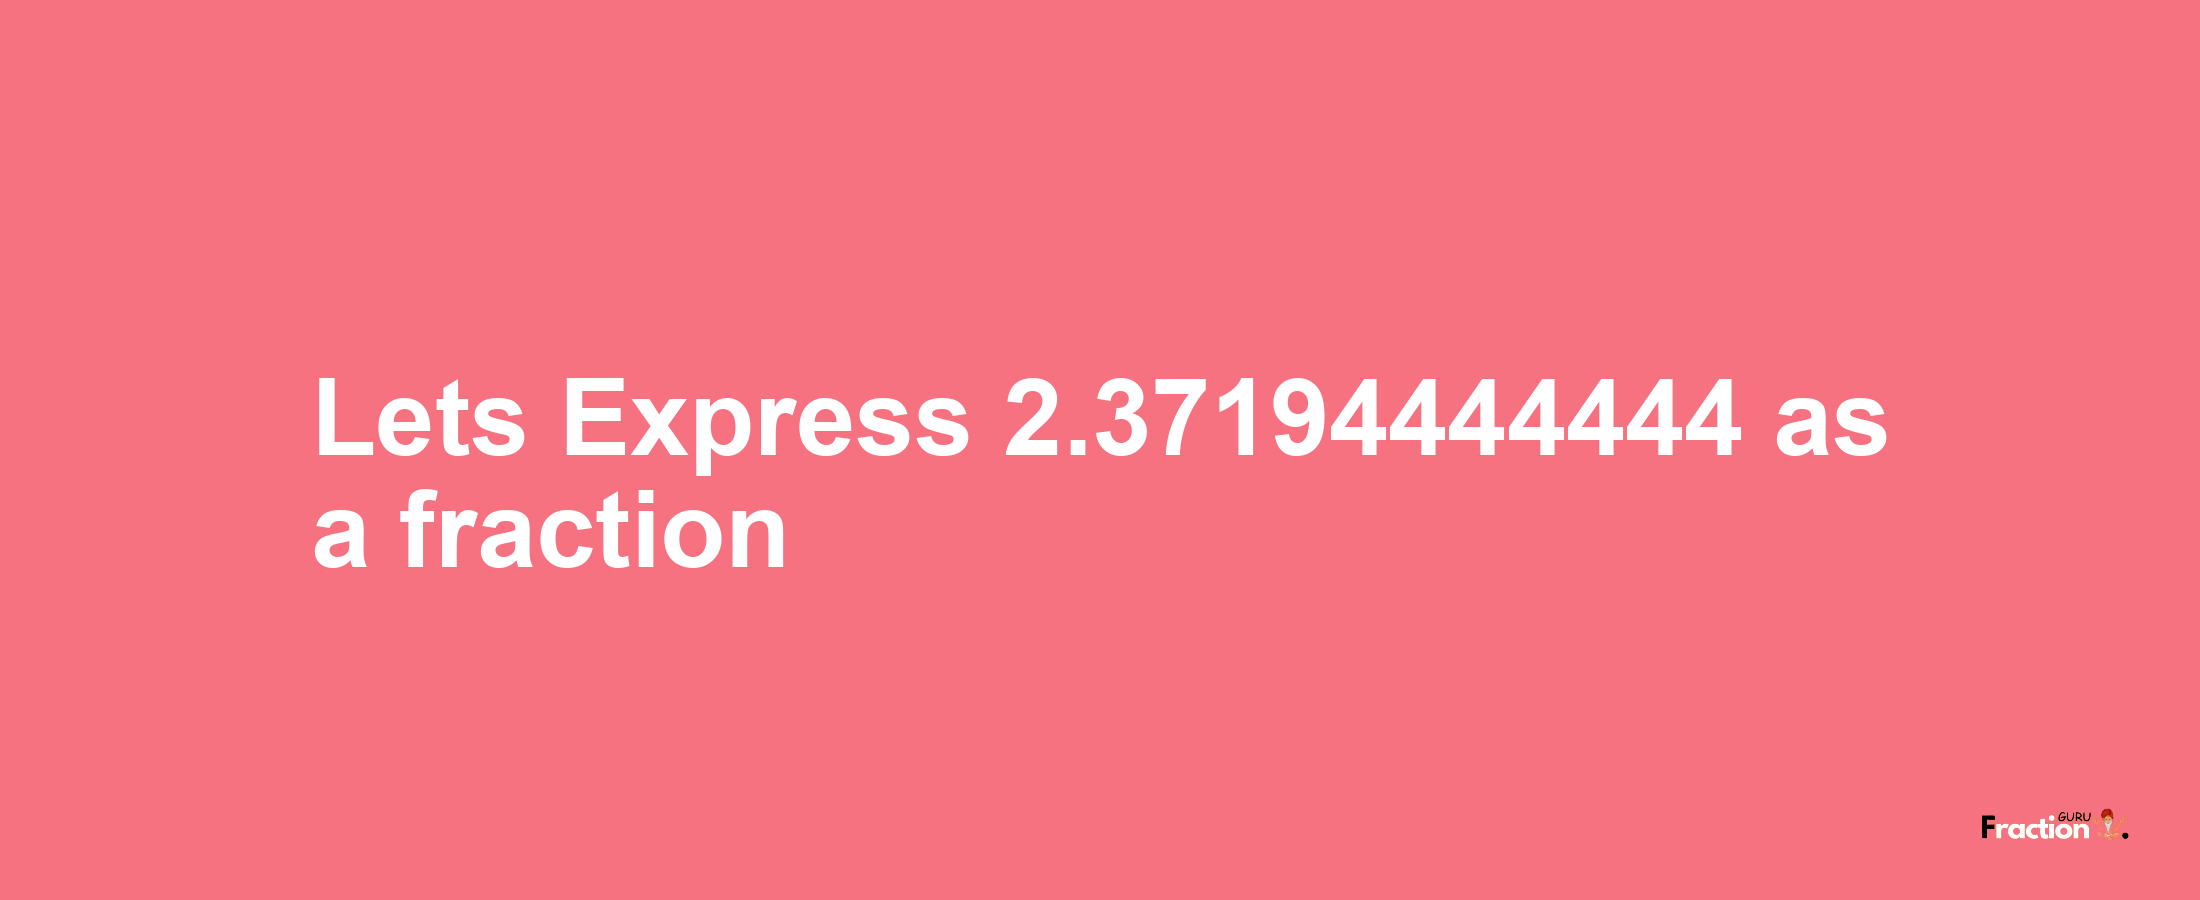 Lets Express 2.37194444444 as afraction